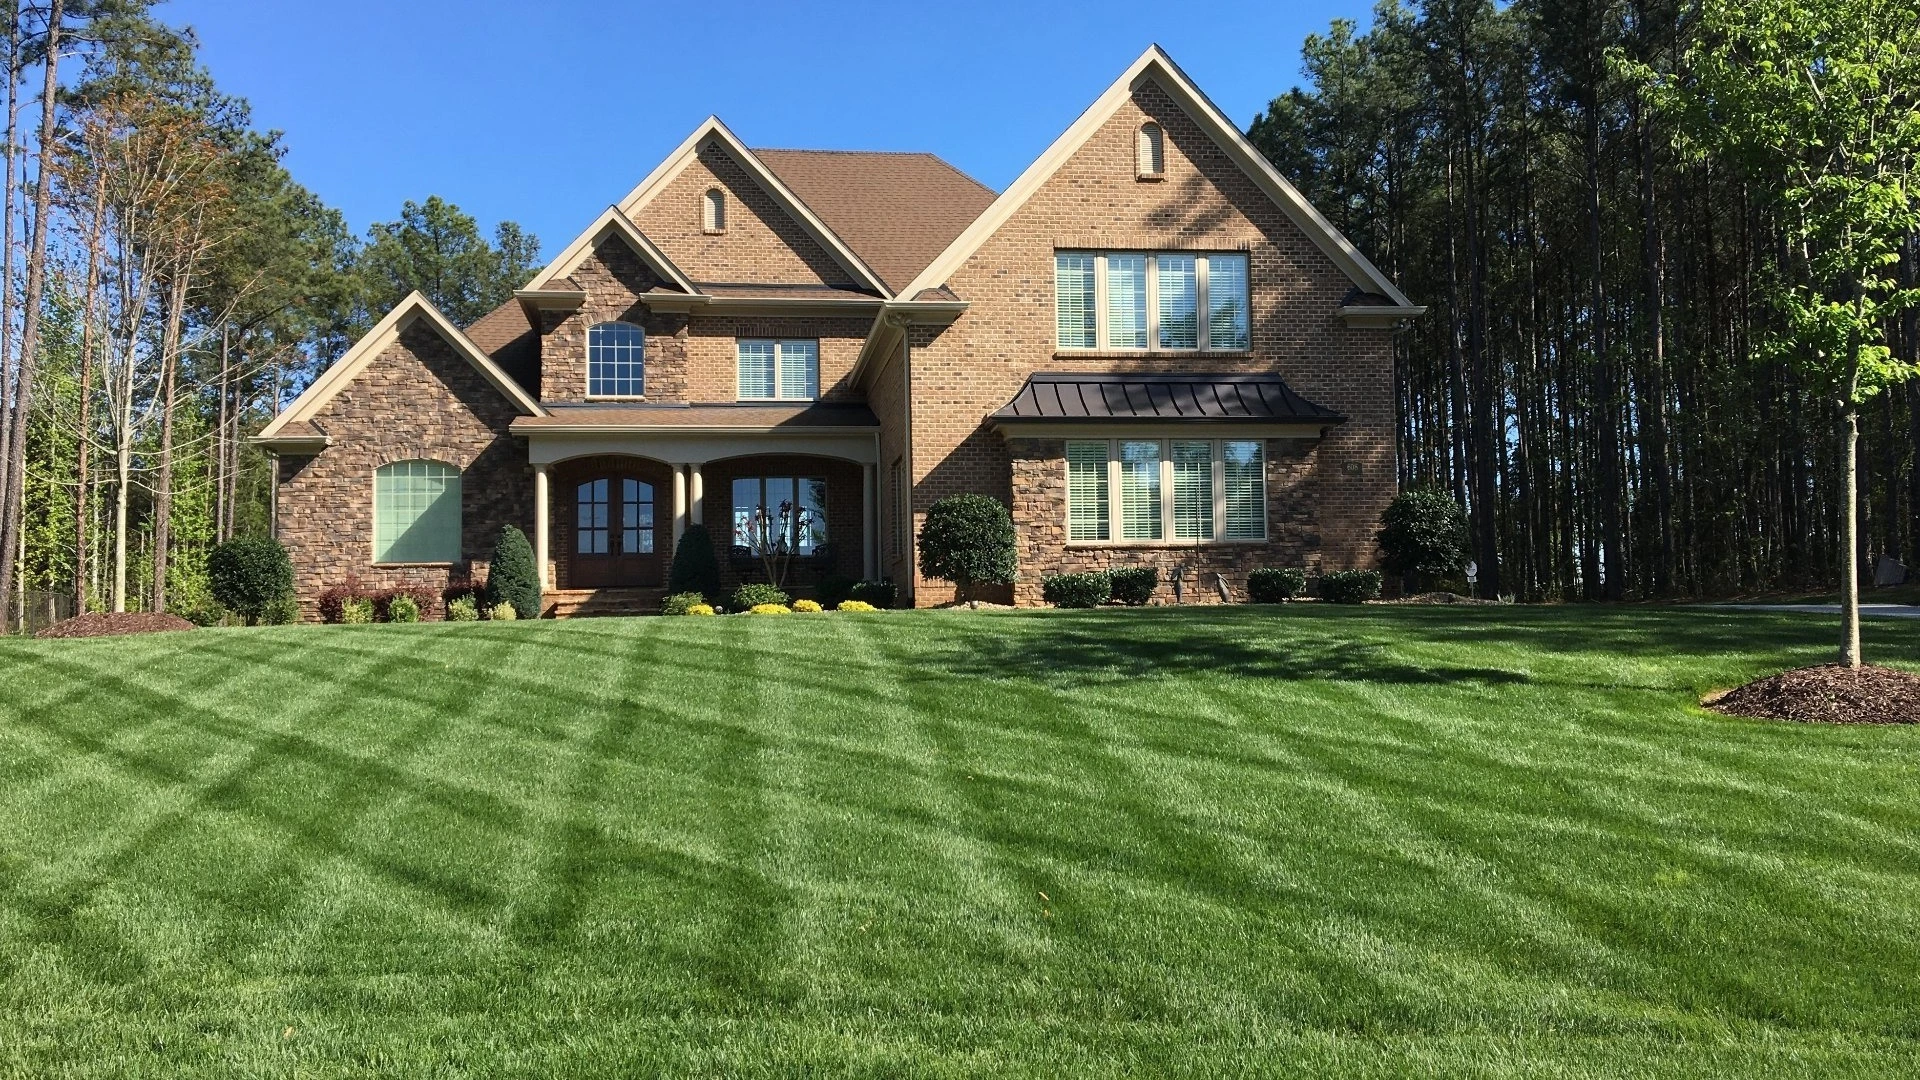 Home in Lake Norman, NC with a perfect front lawn.